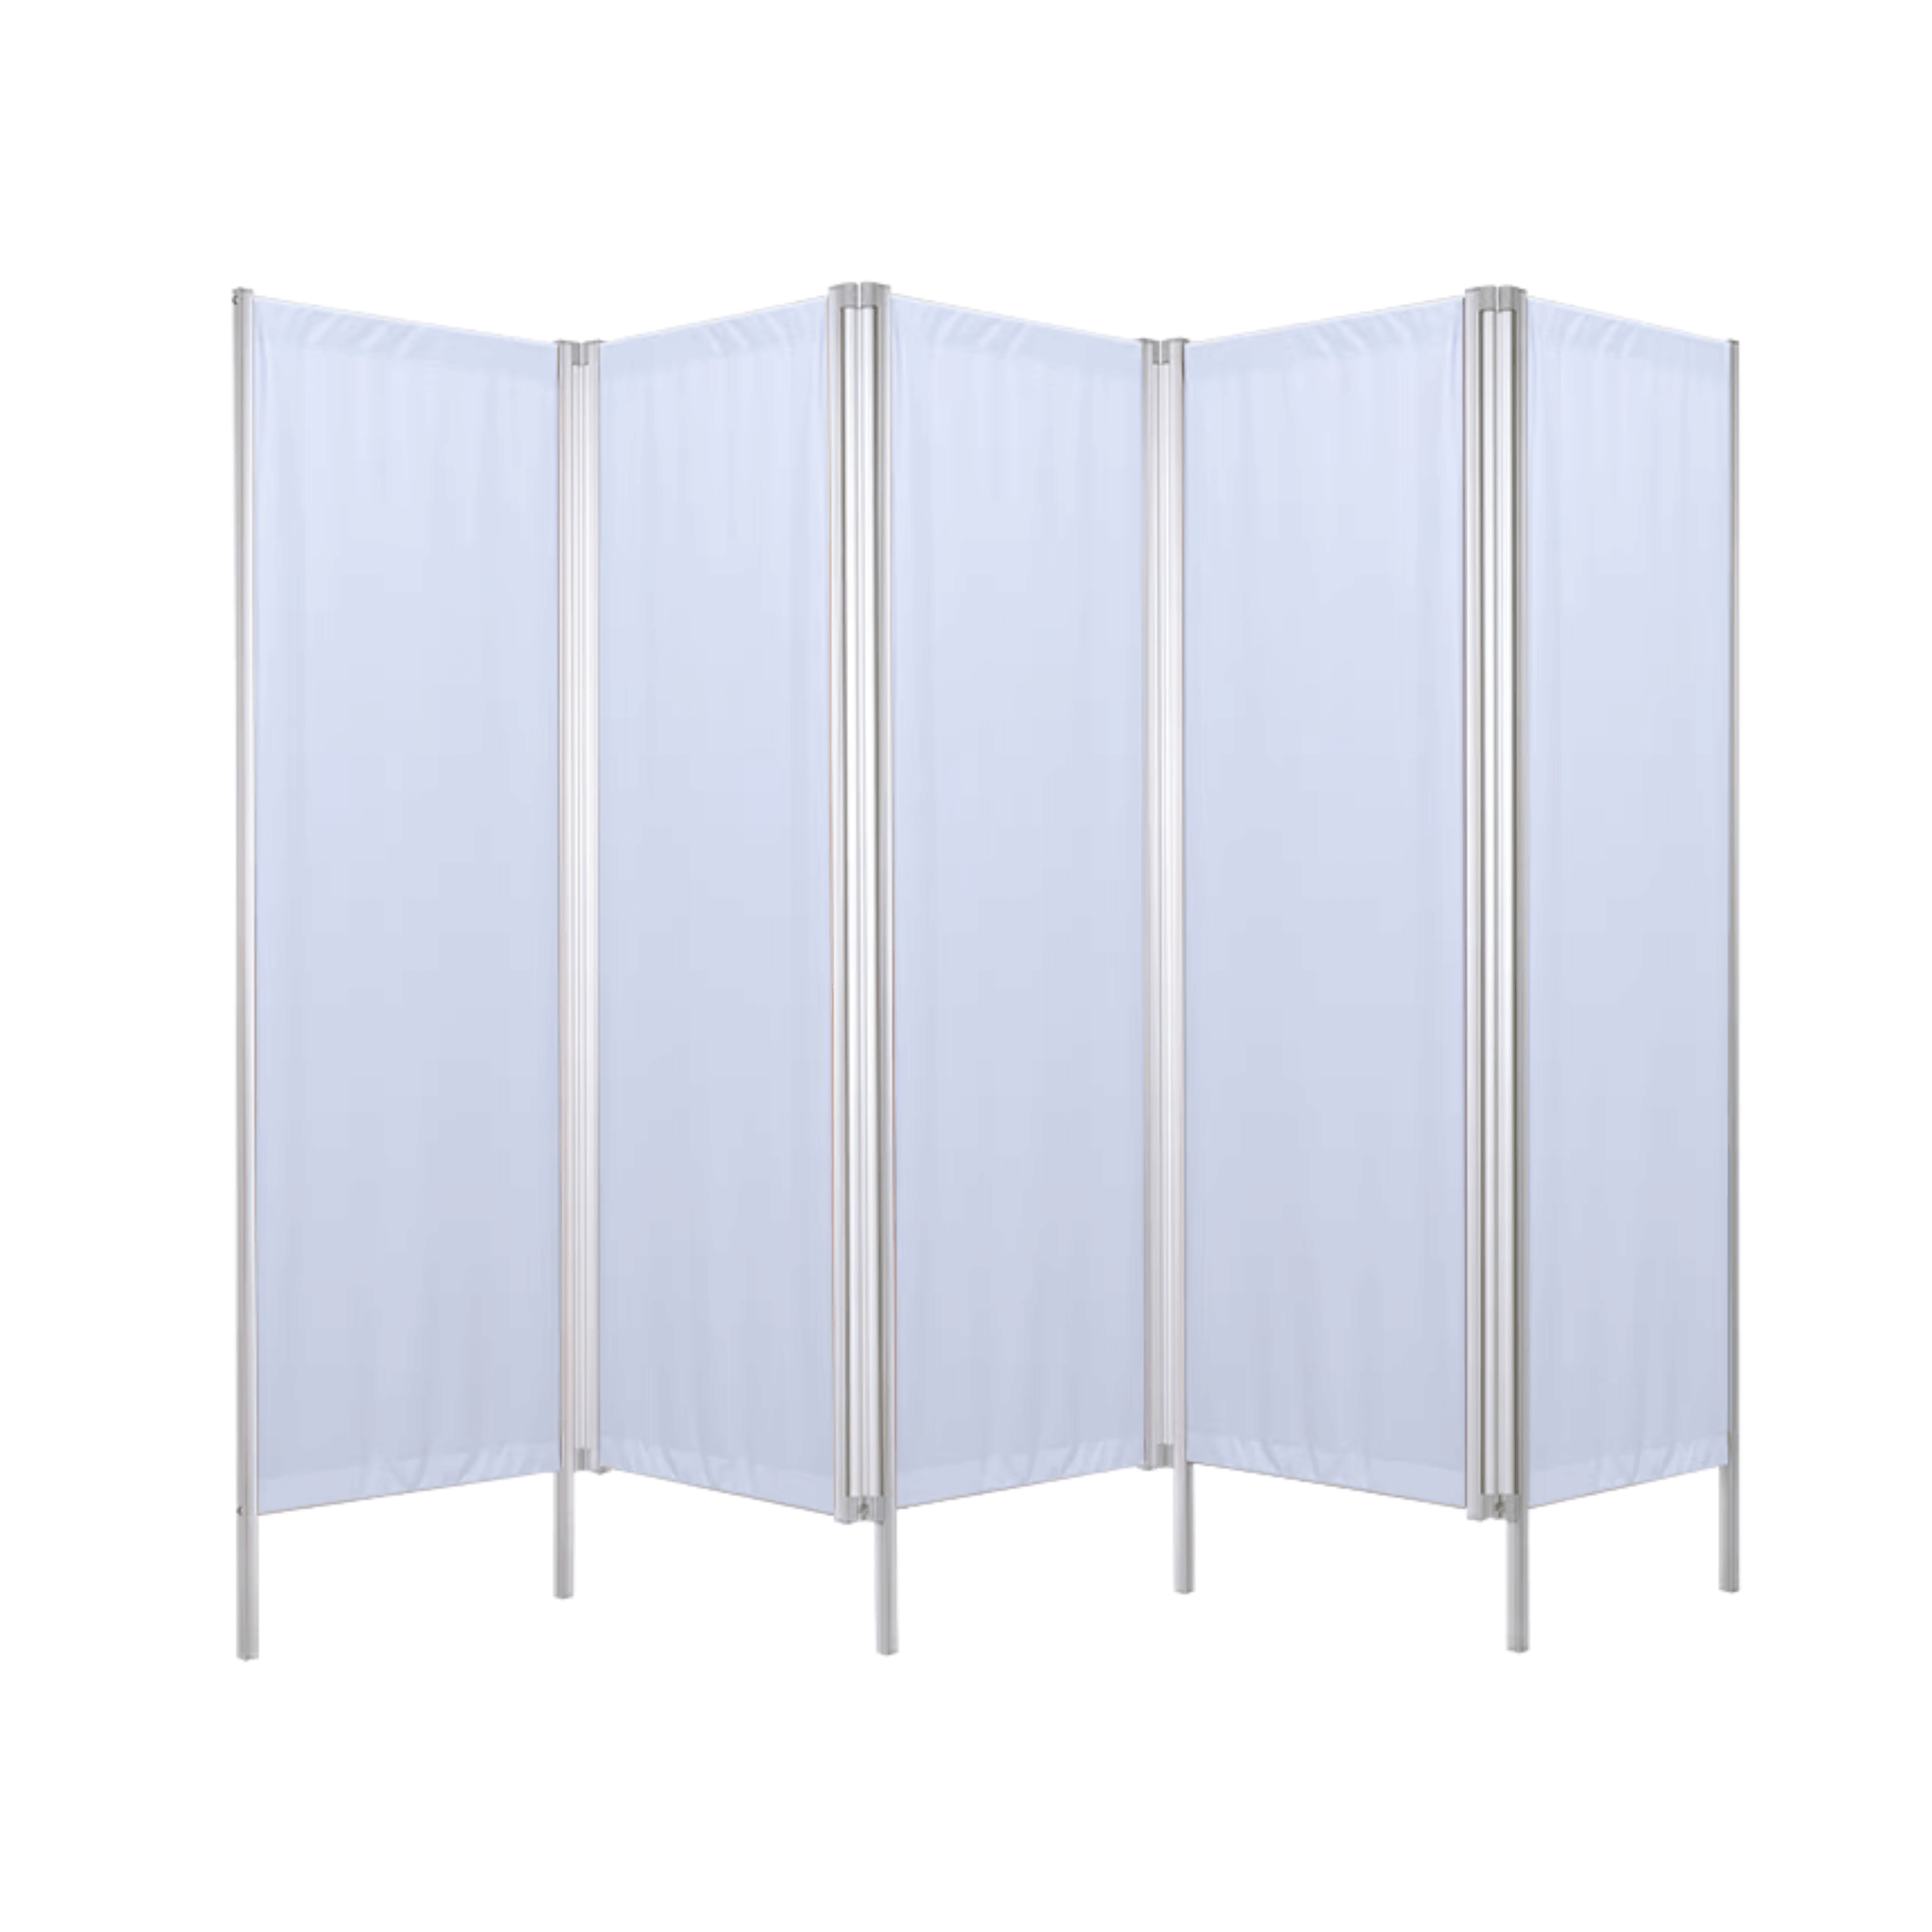 Privacy Screeen- Lightweight, Folding, 5 Section, White, 165 X 258 cm